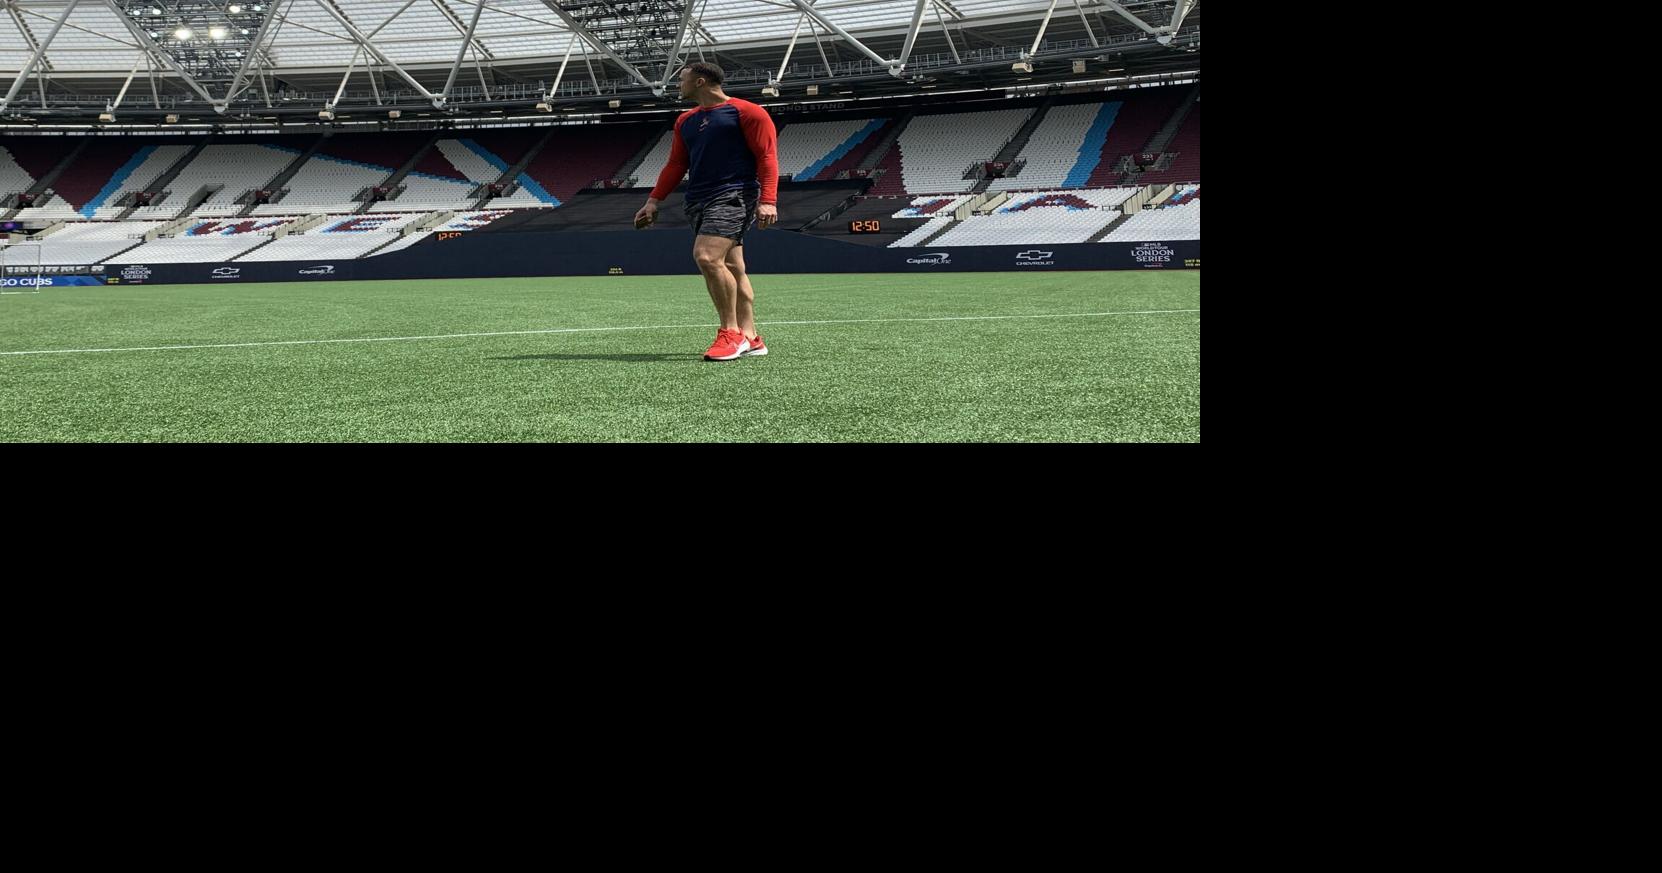 The Cubs in London: Batting practice/workout day at London Stadium